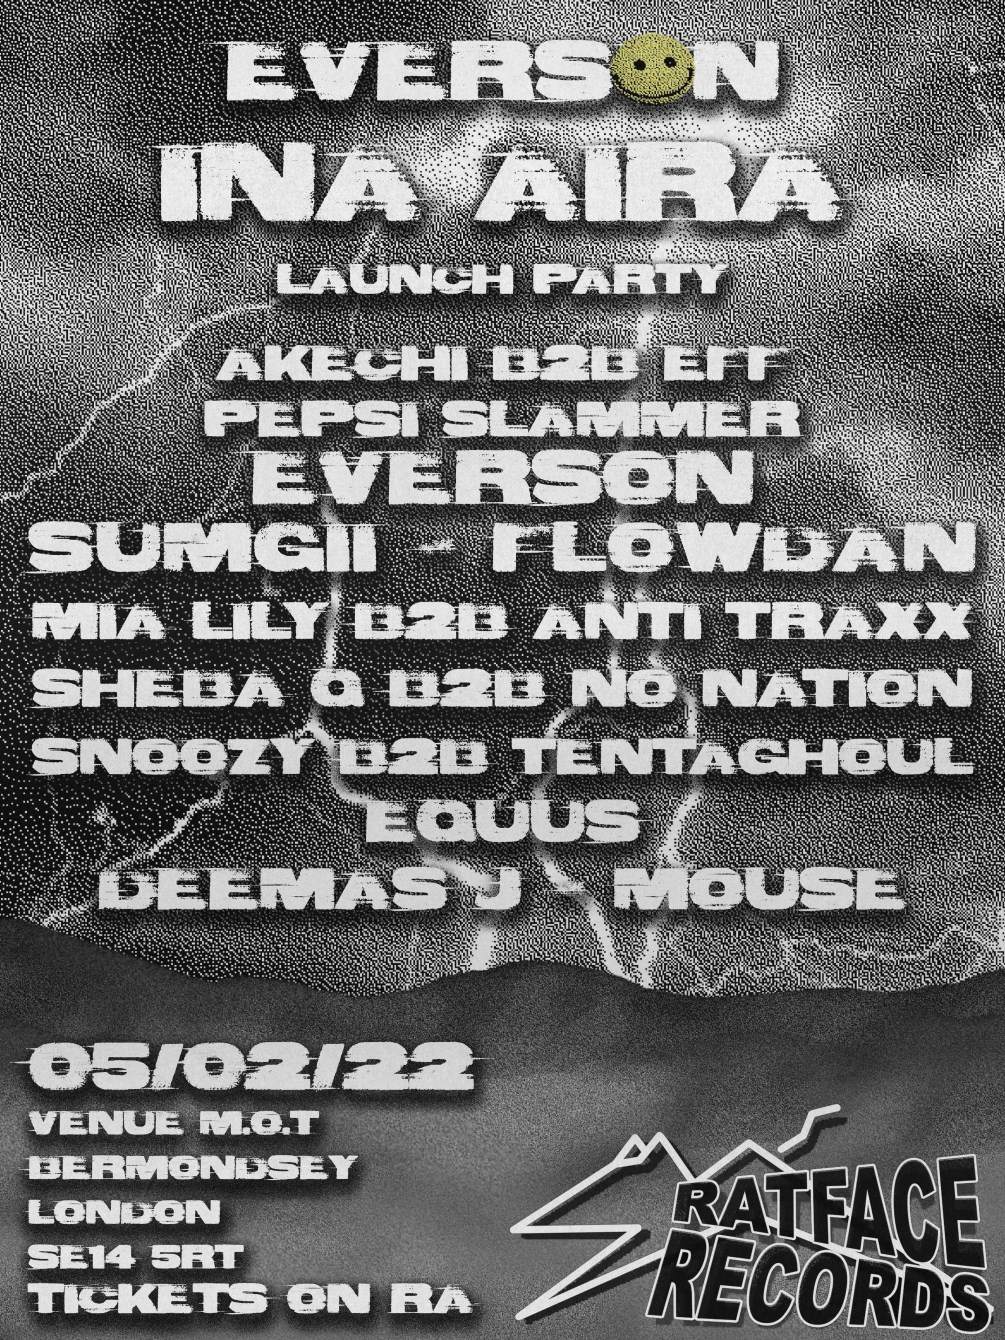 Ratface Records presents: Everson 'Ina Aira' Launch Party - Página frontal